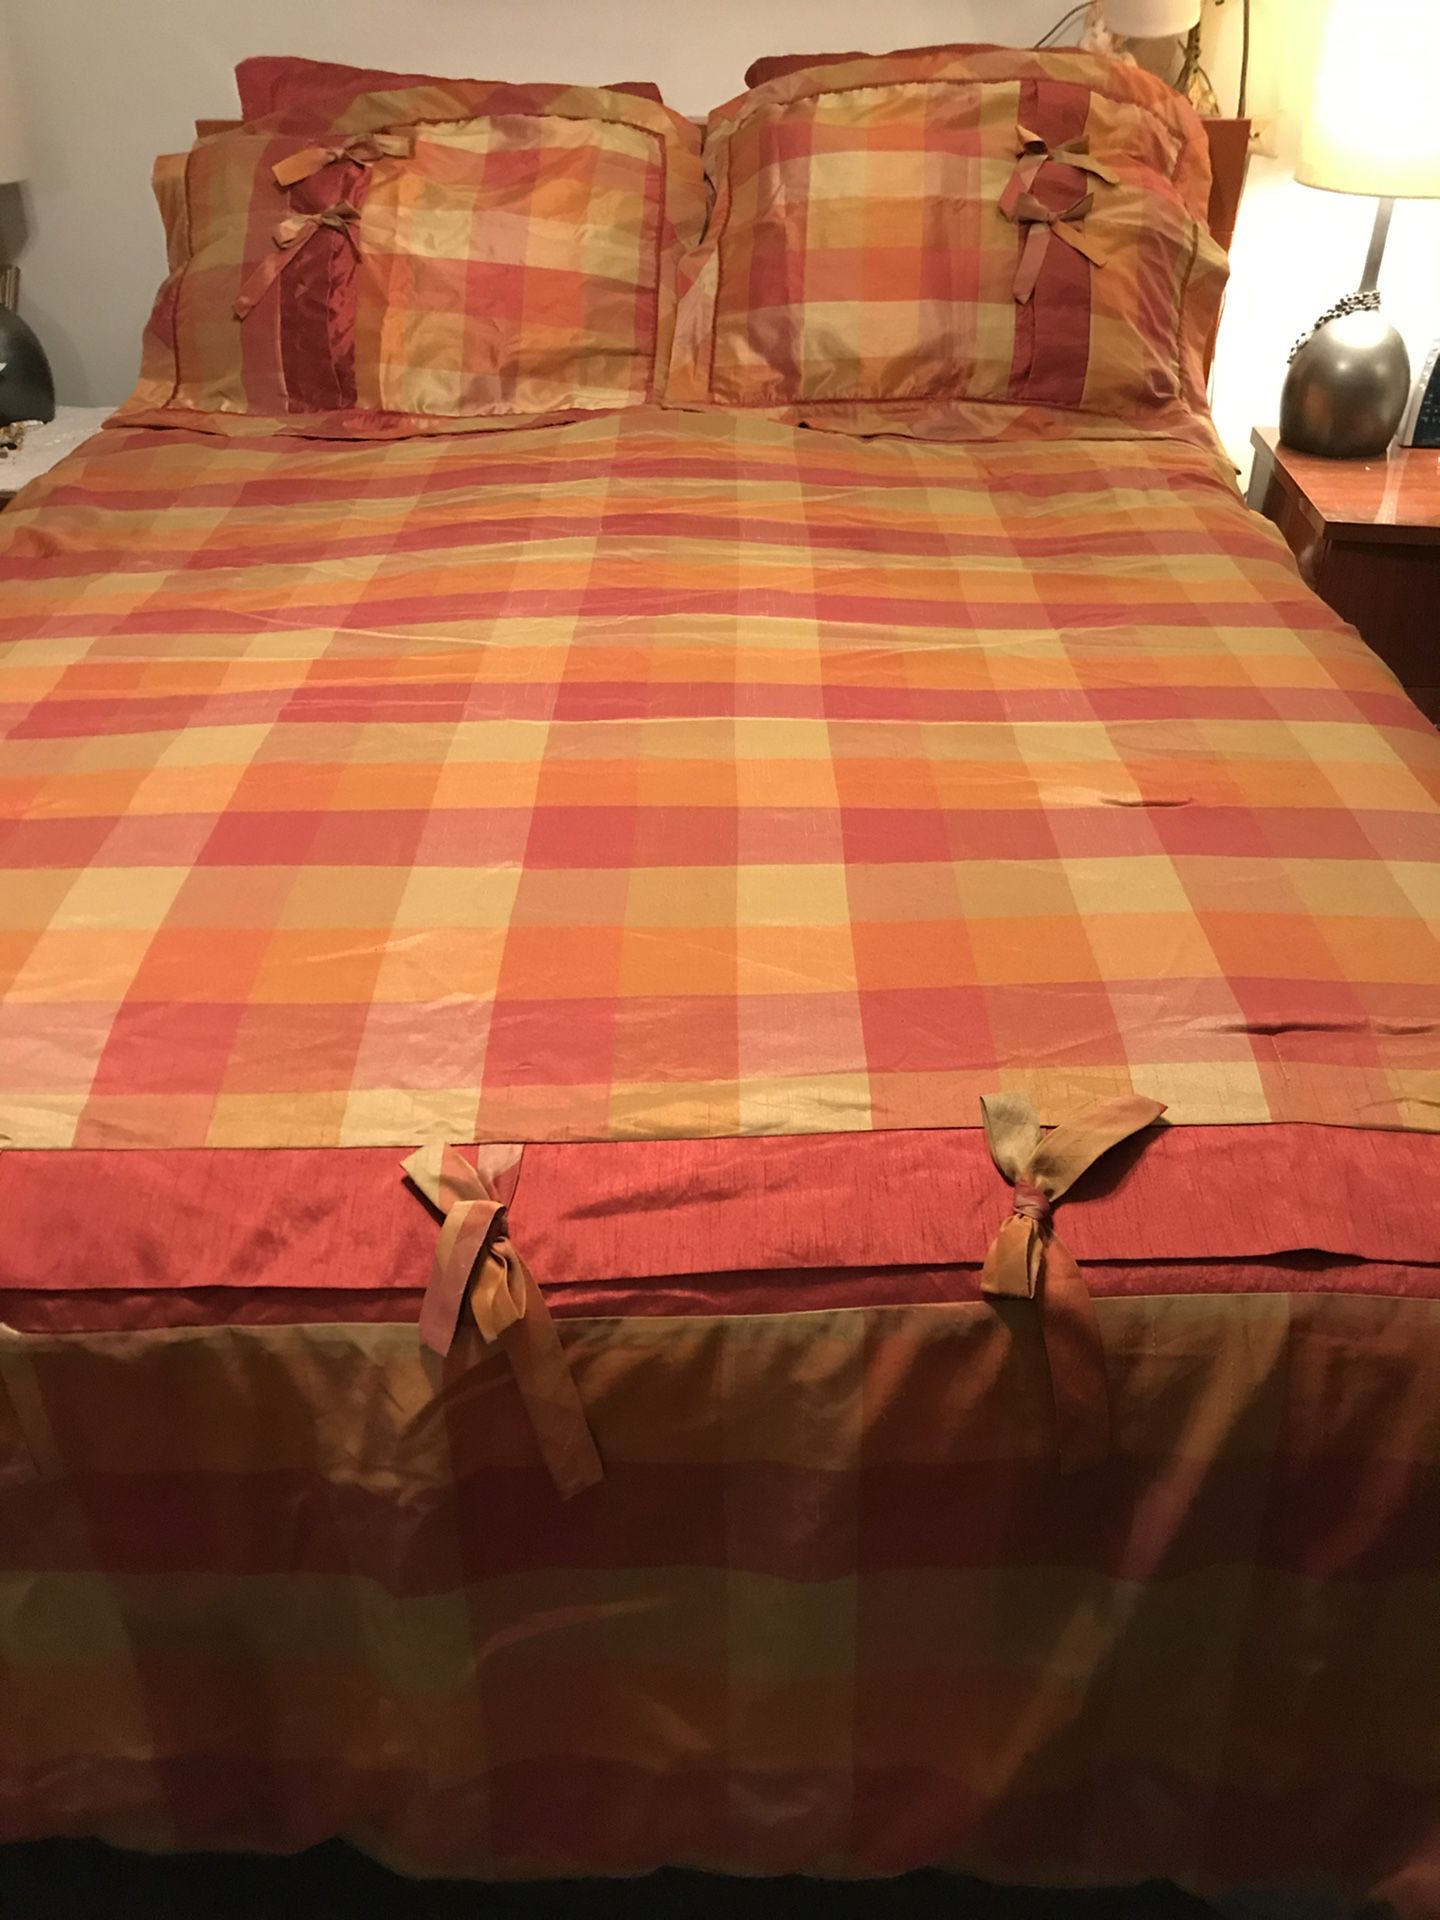 Beautiful Comforter Set by JC Penny’s In Warm Red, Orange & Gold, Excellent Condition, Smoke-Free Home